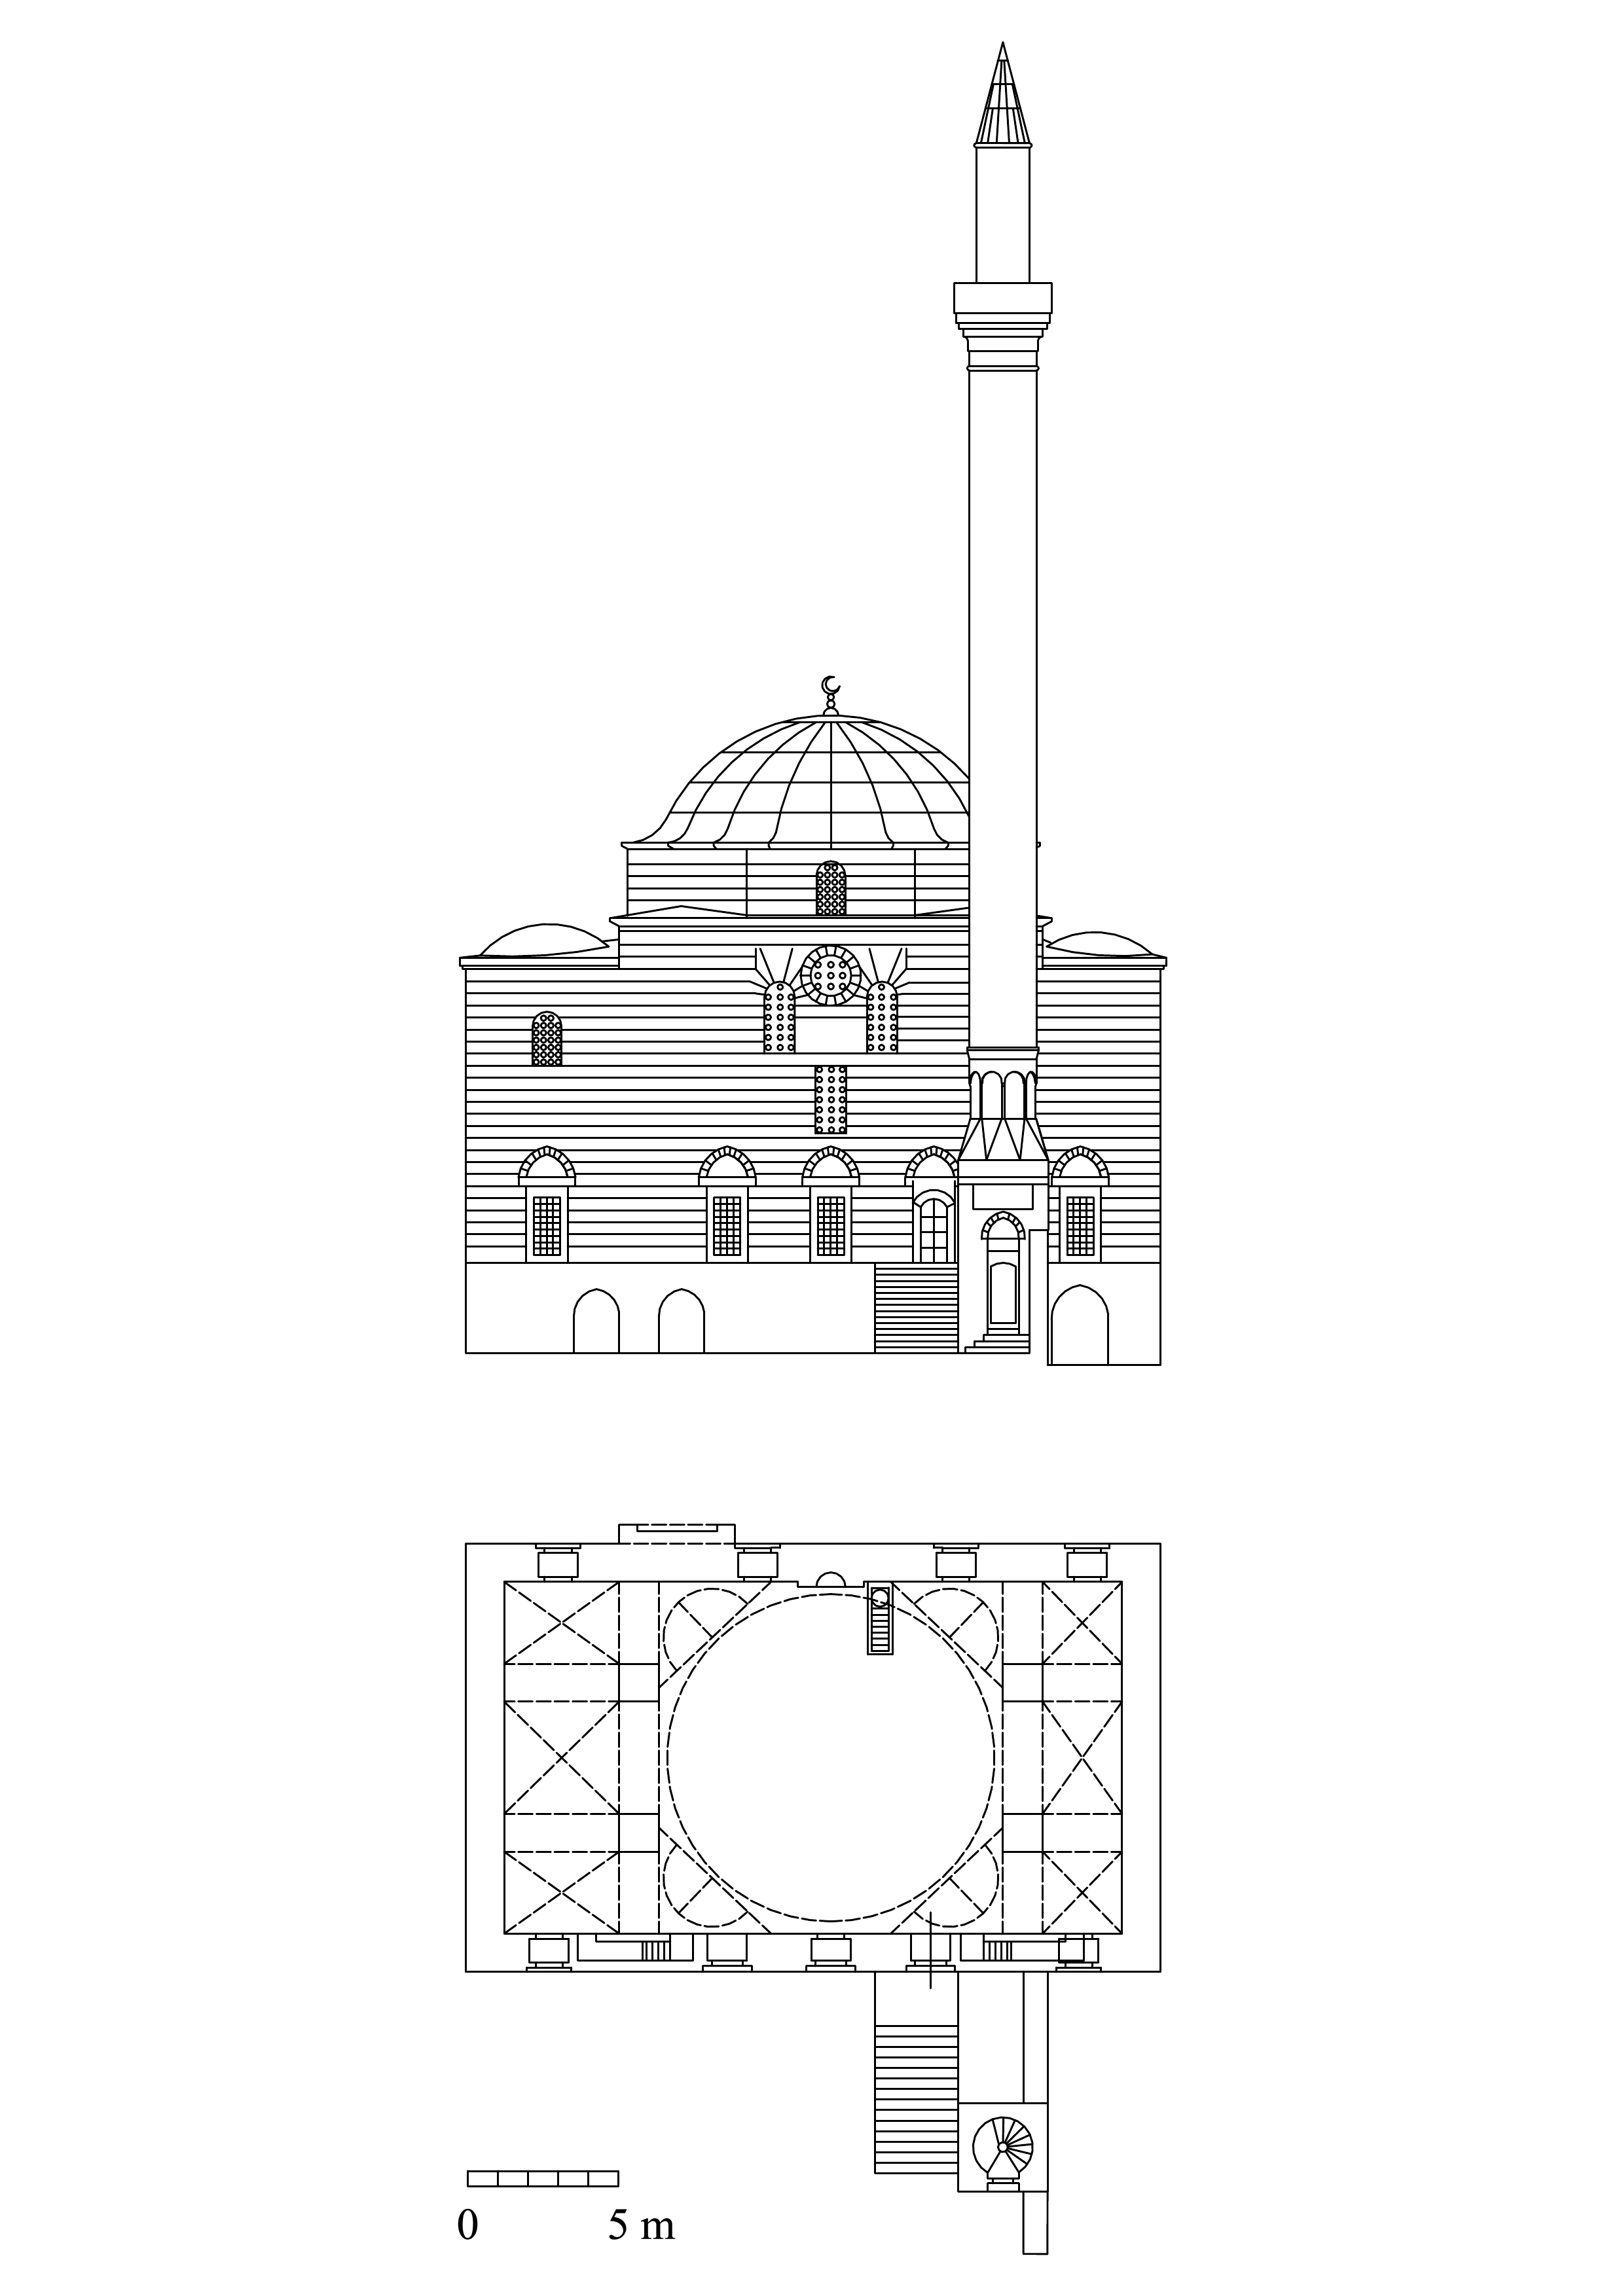 Floor plan and elevation of Melek Ahmed Pasa Mosque